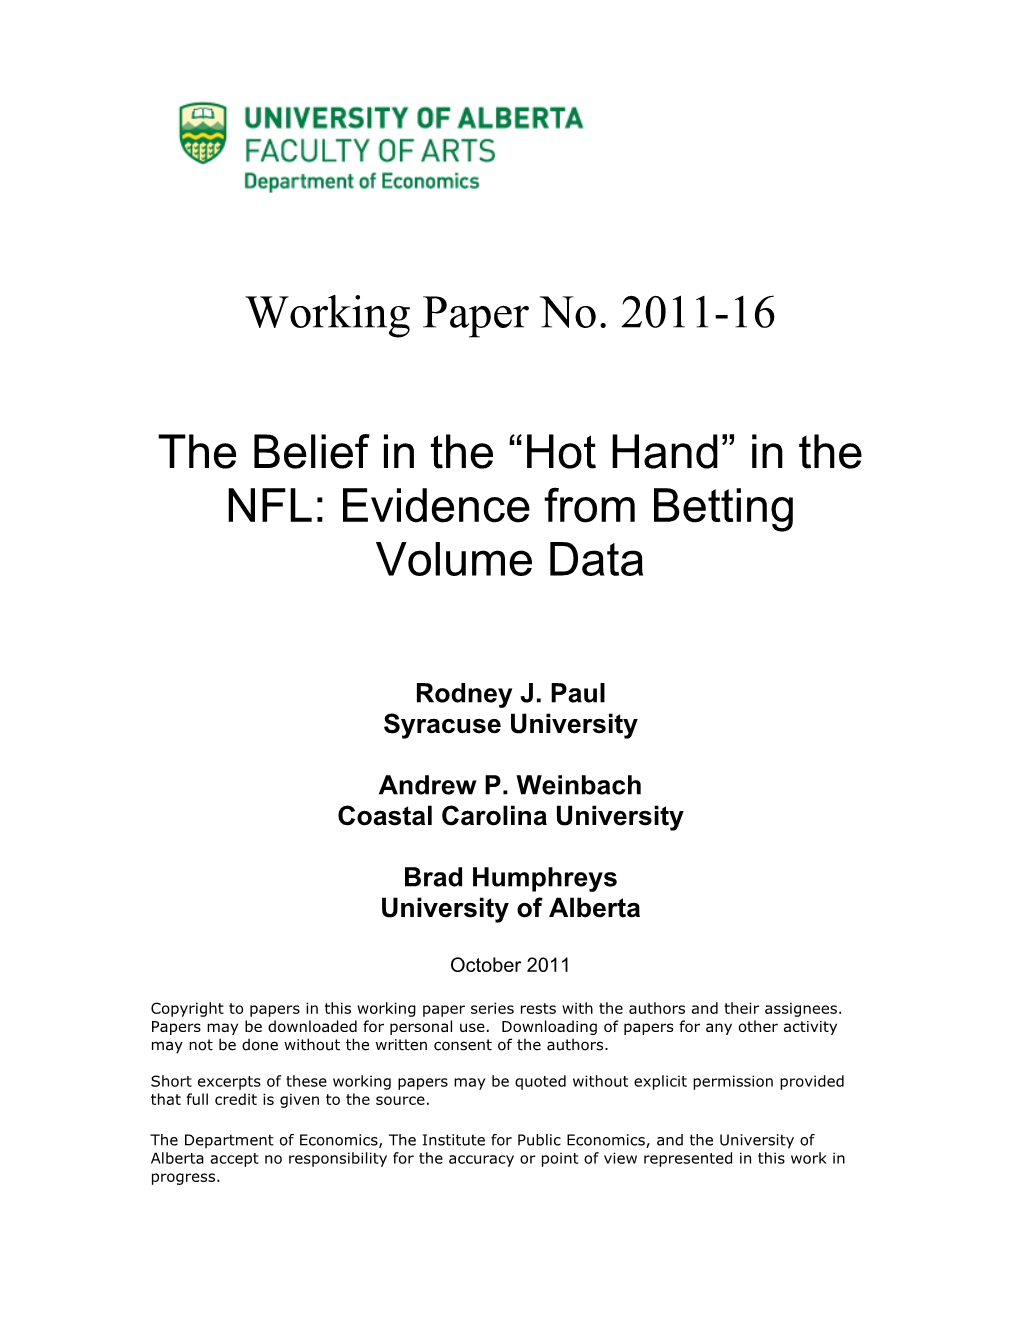 Working Paper No. 2011-16 the Belief in the “Hot Hand” in the NFL: Evidence from Betting Volume Data